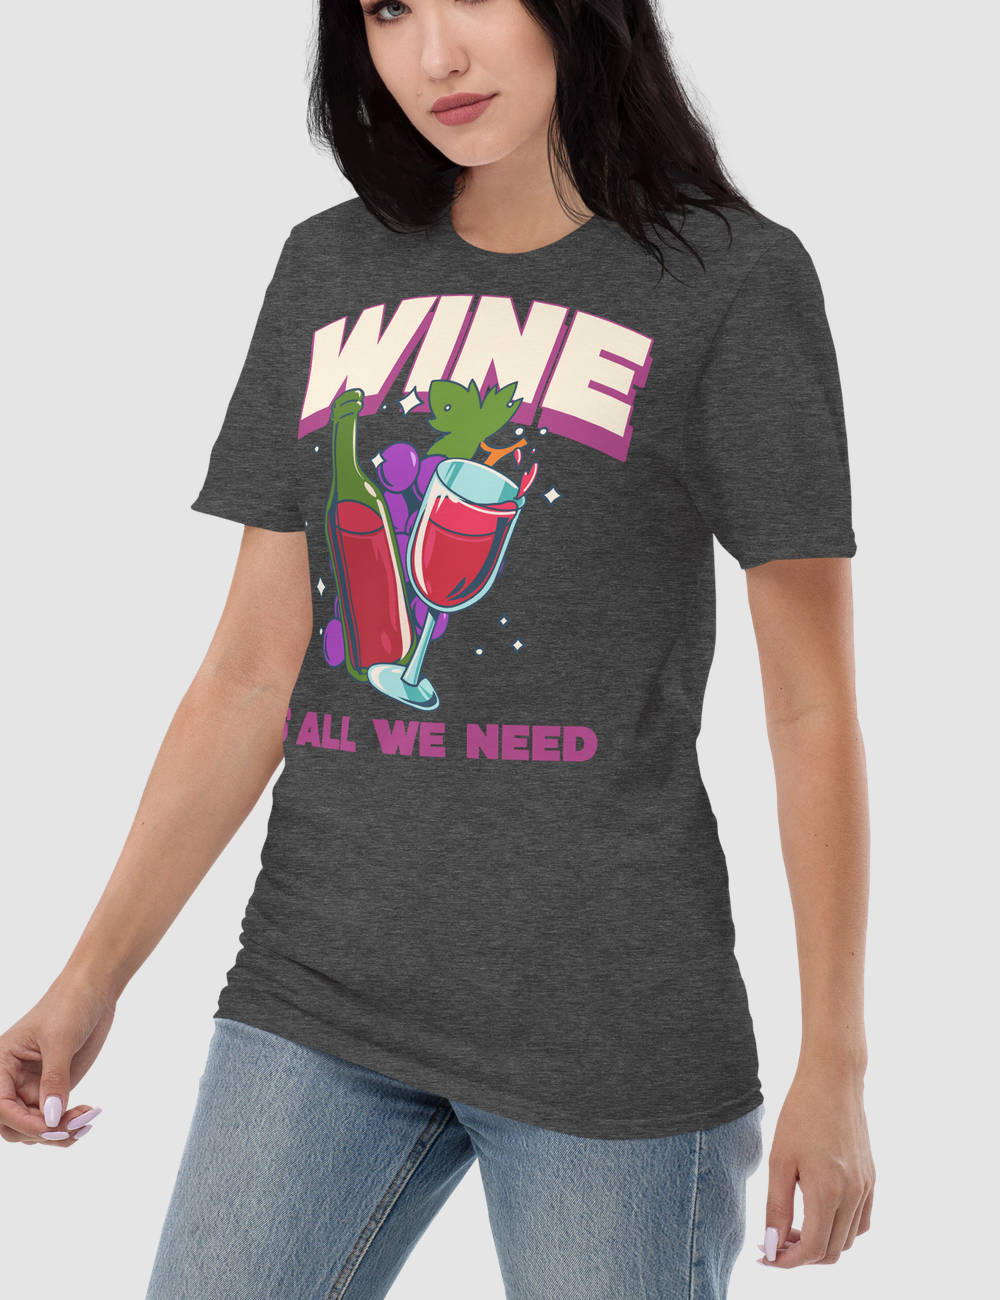 Wine Is All We Need Women's Relaxed T-Shirt OniTakai